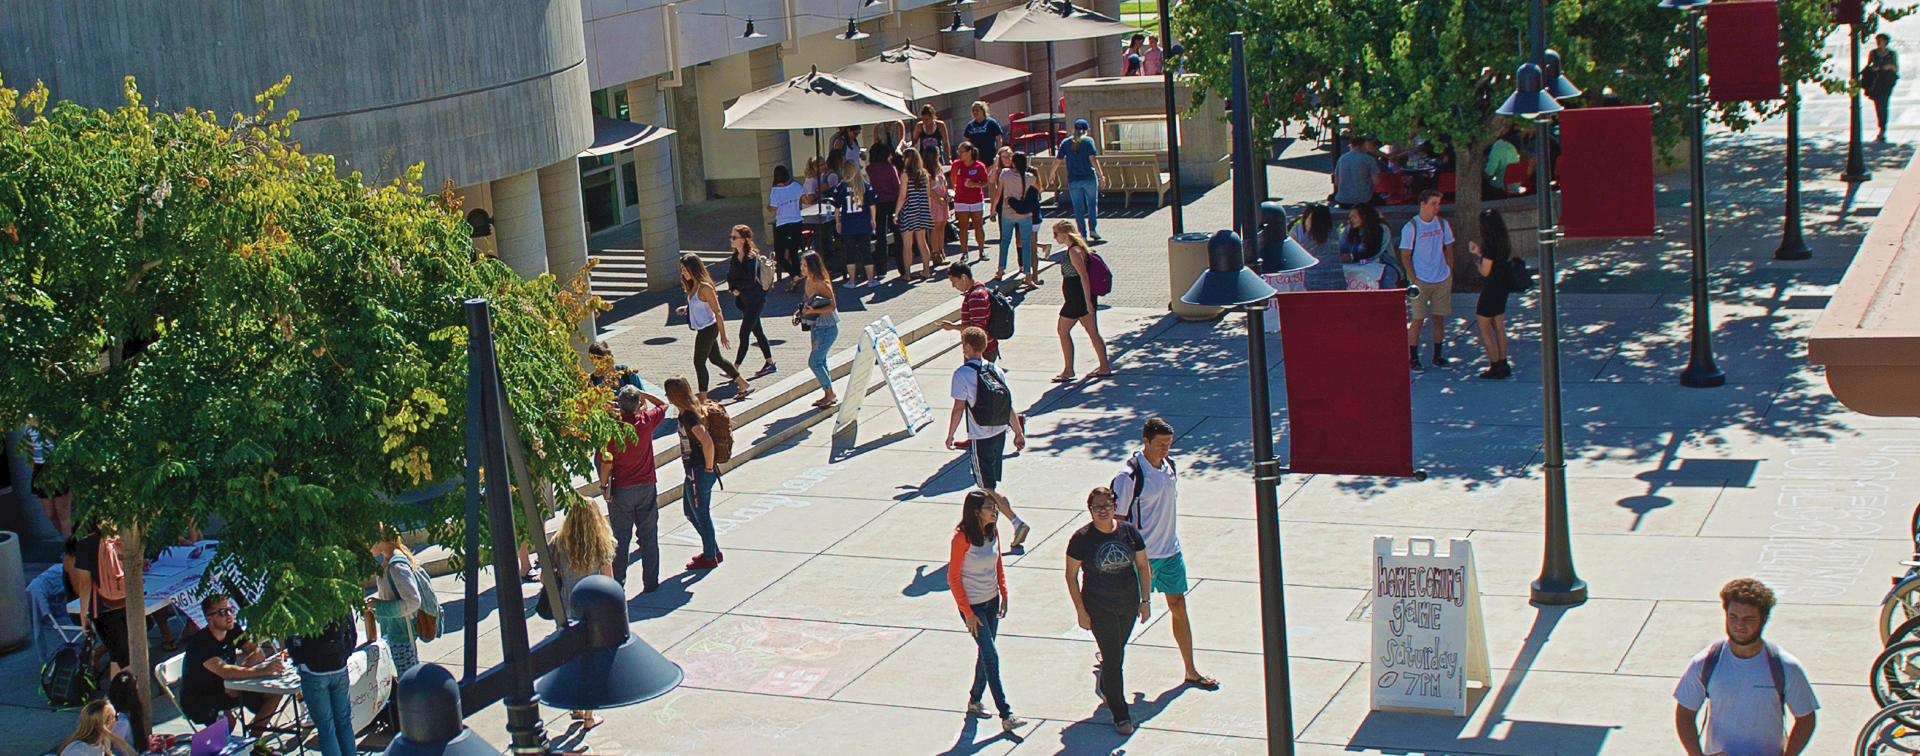 Picture of a campus center with students walking.